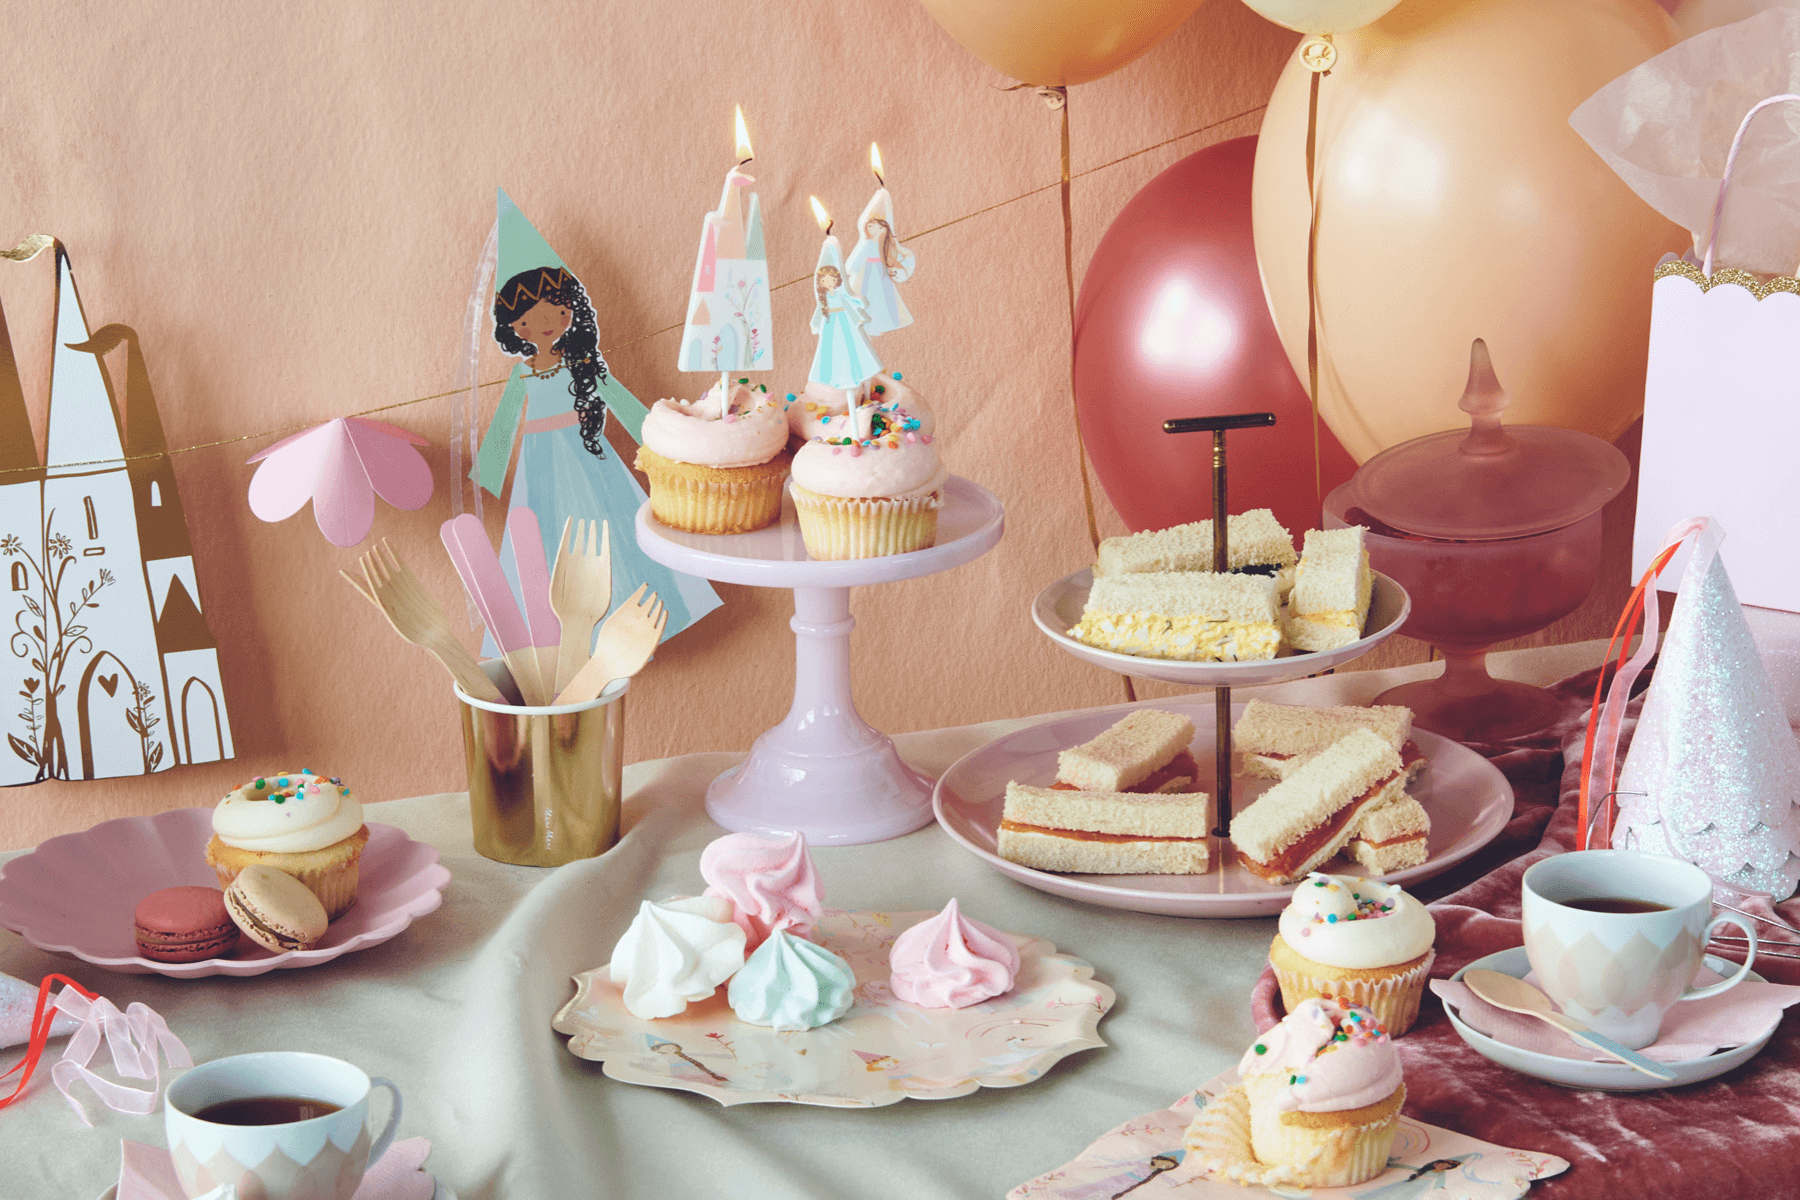 How to Throw a Favorite Things Party - Made by A Princess